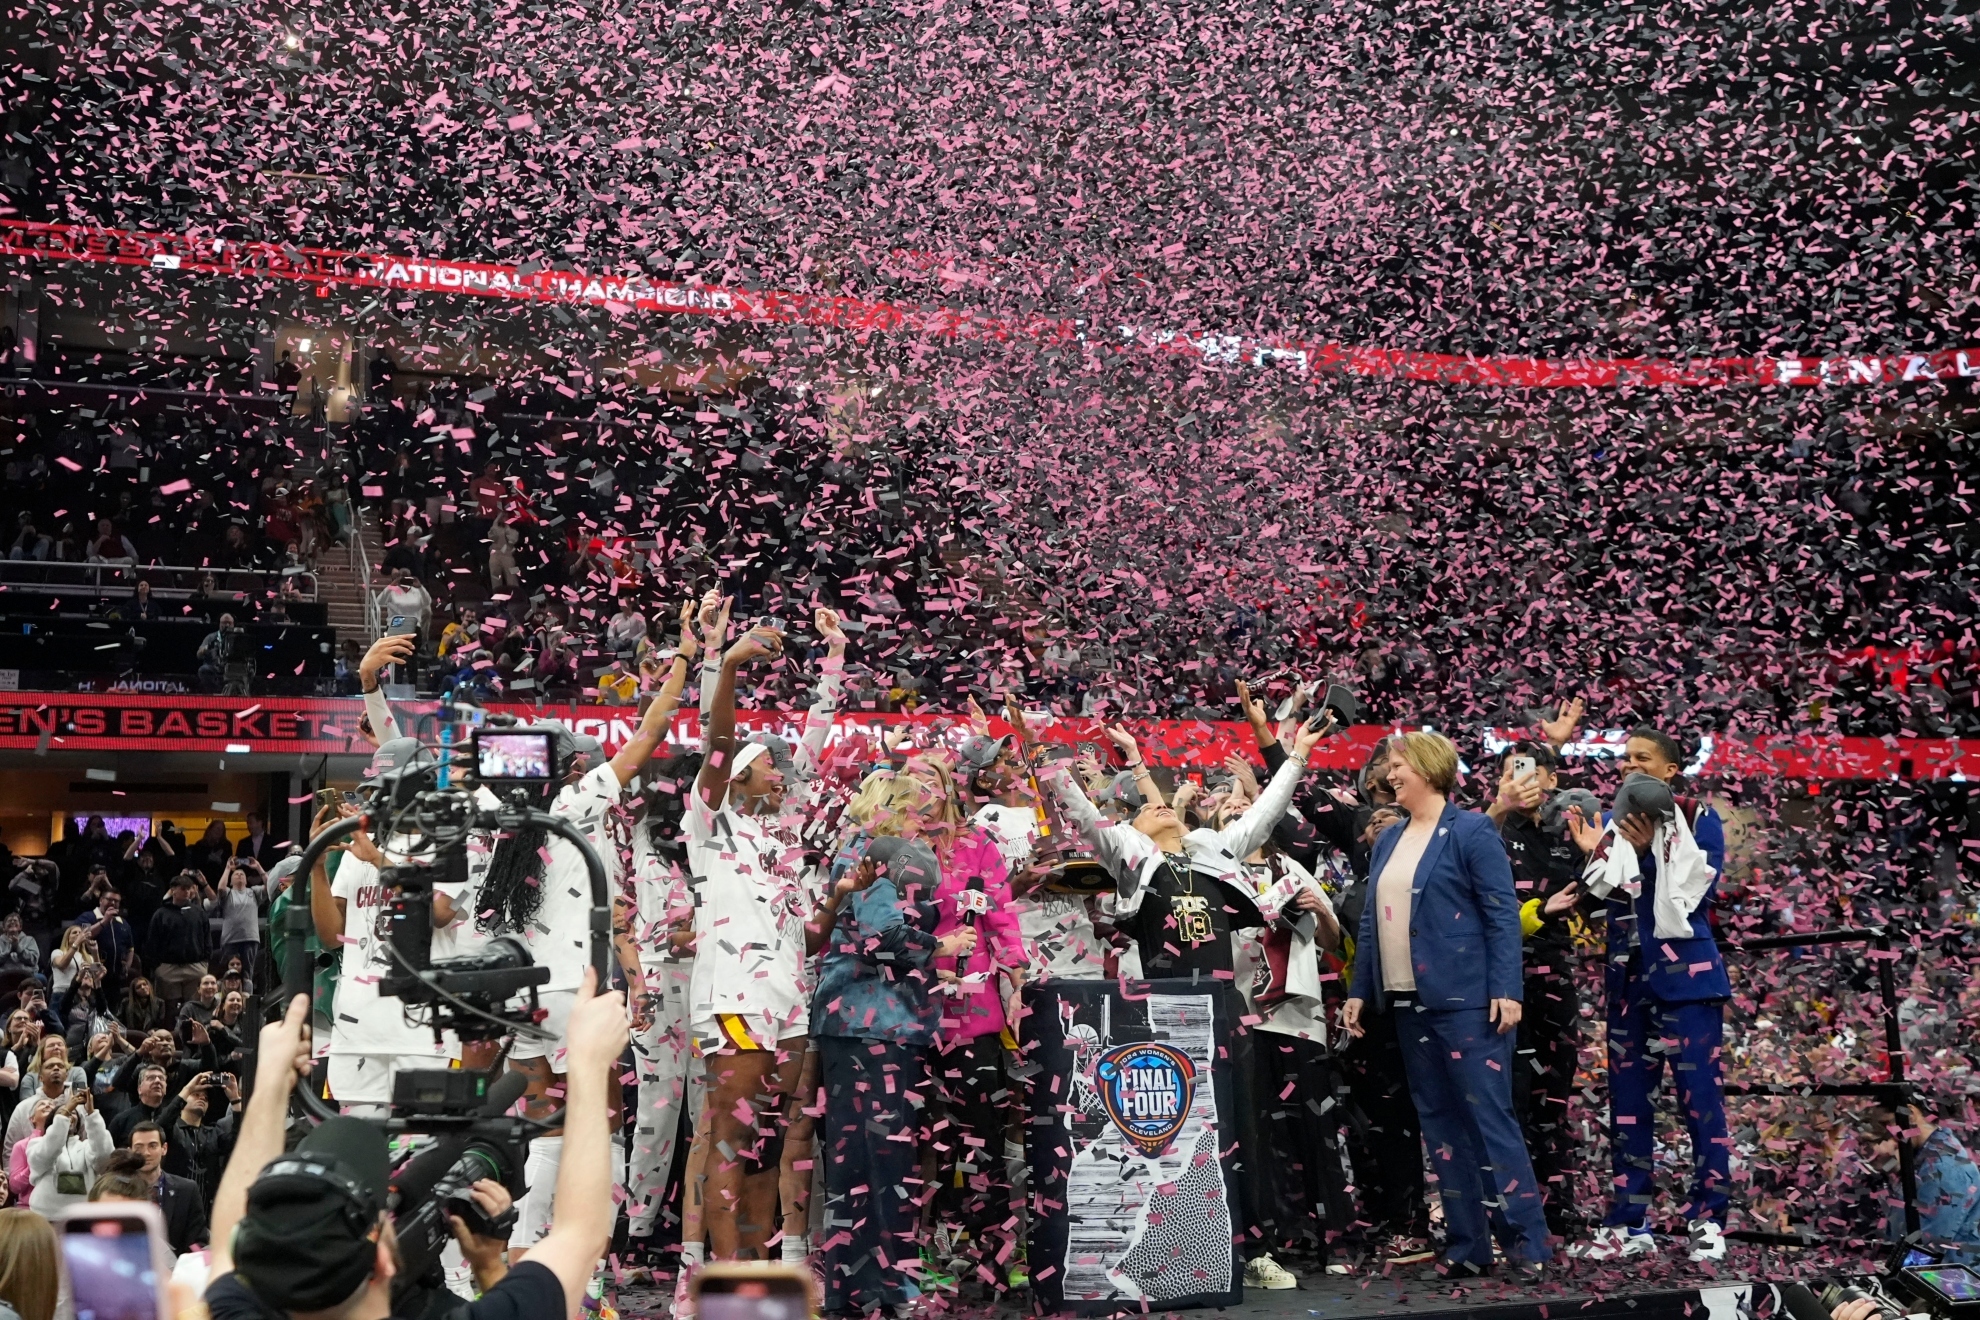 South Carolina players and coach celebrate after the Final Four college basketball championship game against Iowa in the womens NCAA Tournament